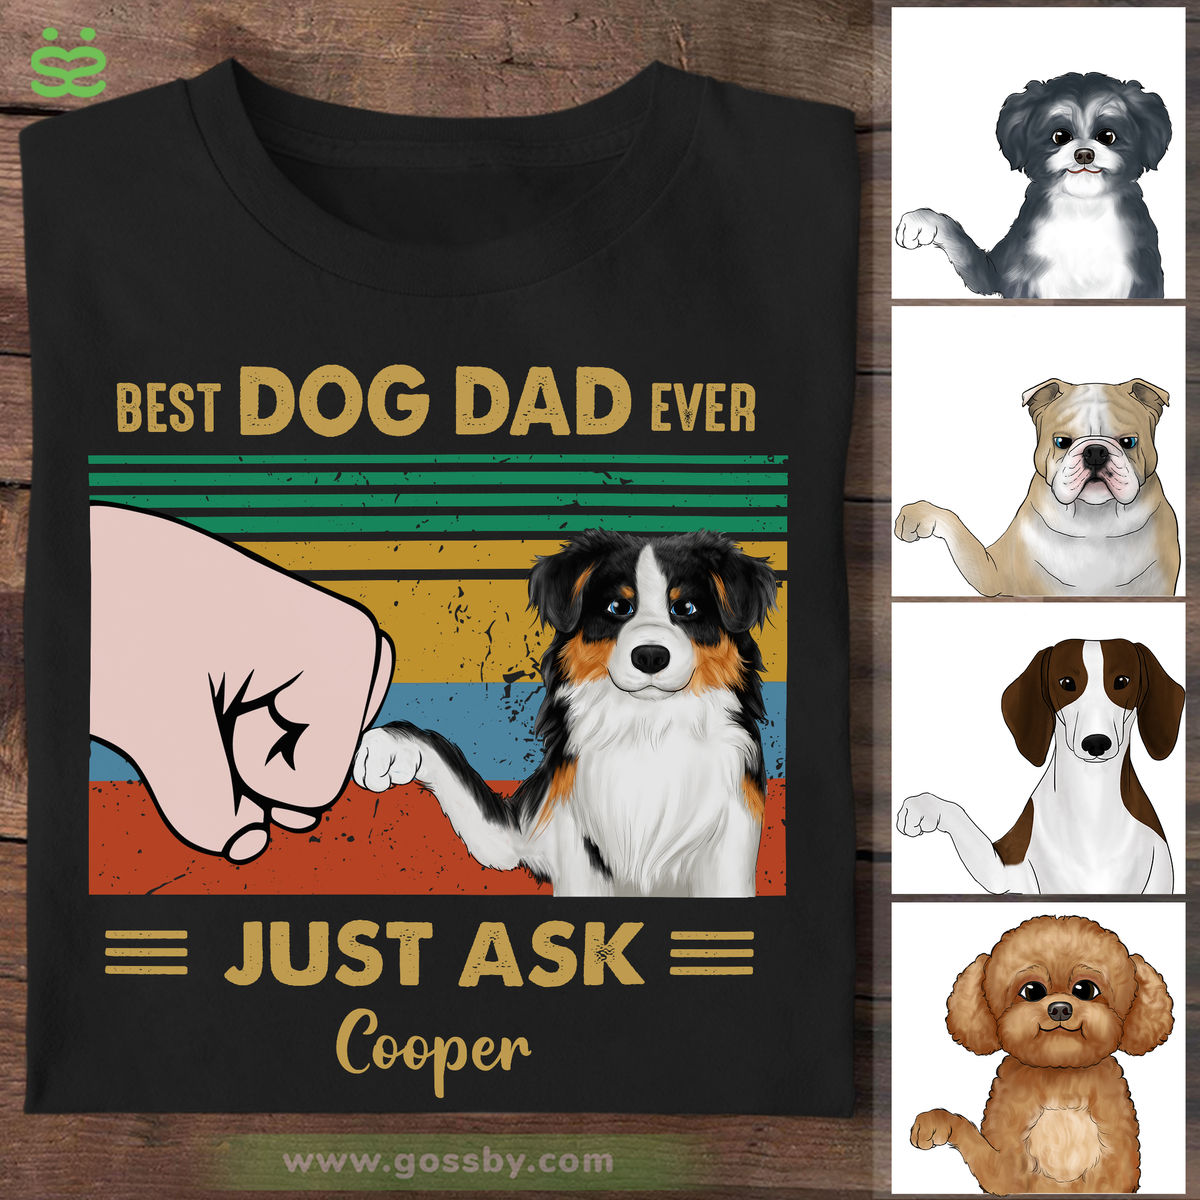 Personalized Shirt - Funny T Shirt - Best DOG DAD ever, Just ask